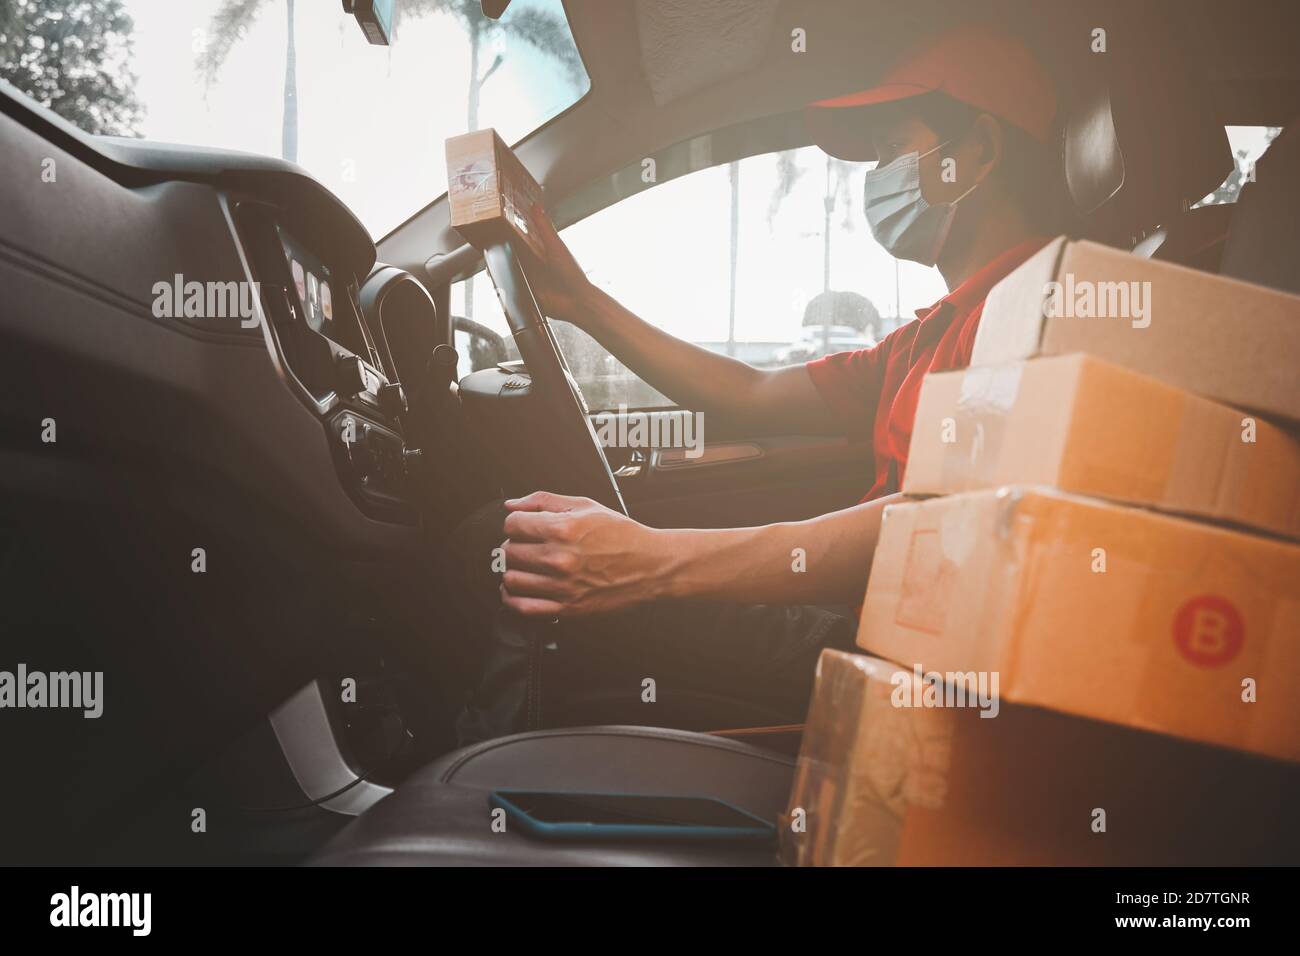 New normal express-Delivery services courier wearing medical mask for safety protection from virus infection working with postal boxes on delivery car Stock Photo